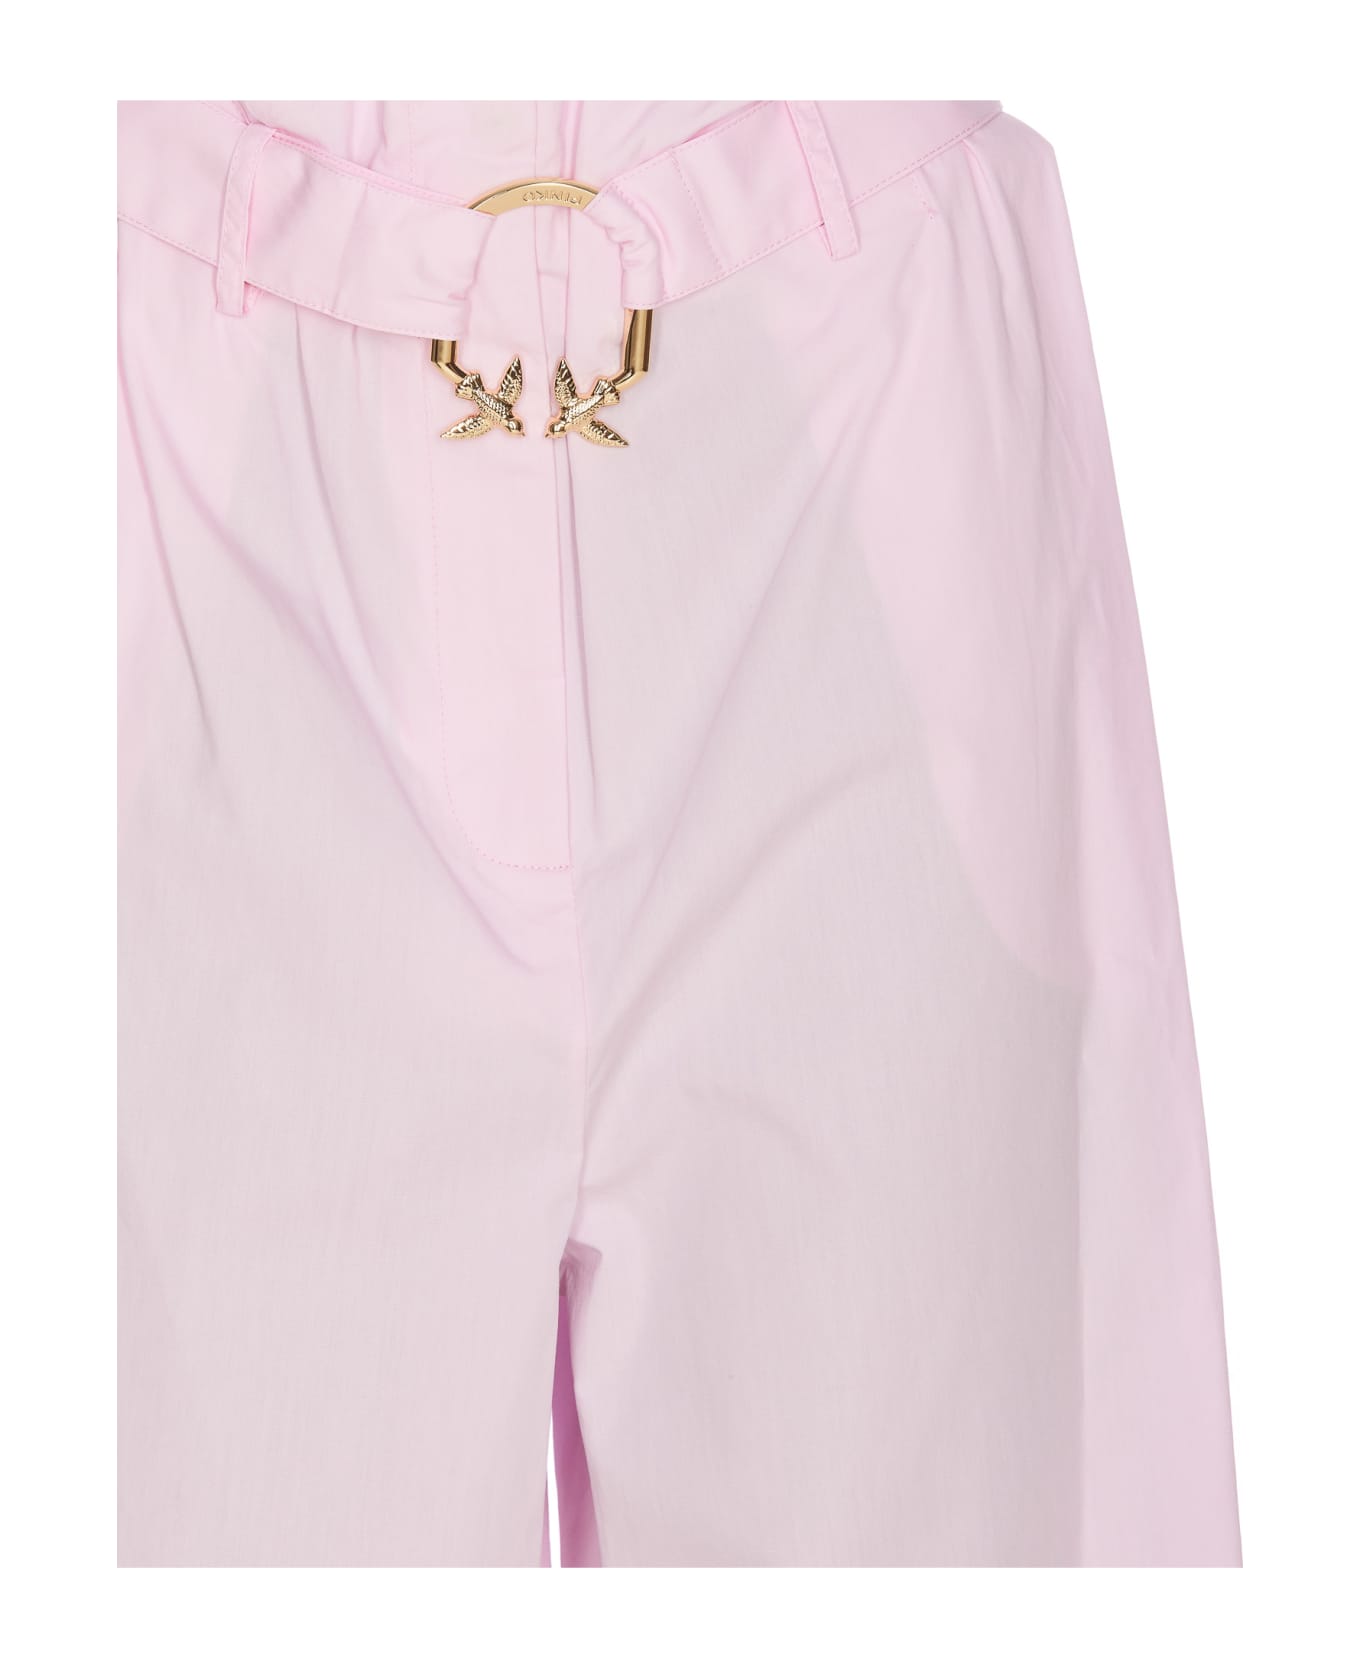 Pinko Wide Leg Pants With Trousers - Rosa dolce lilla